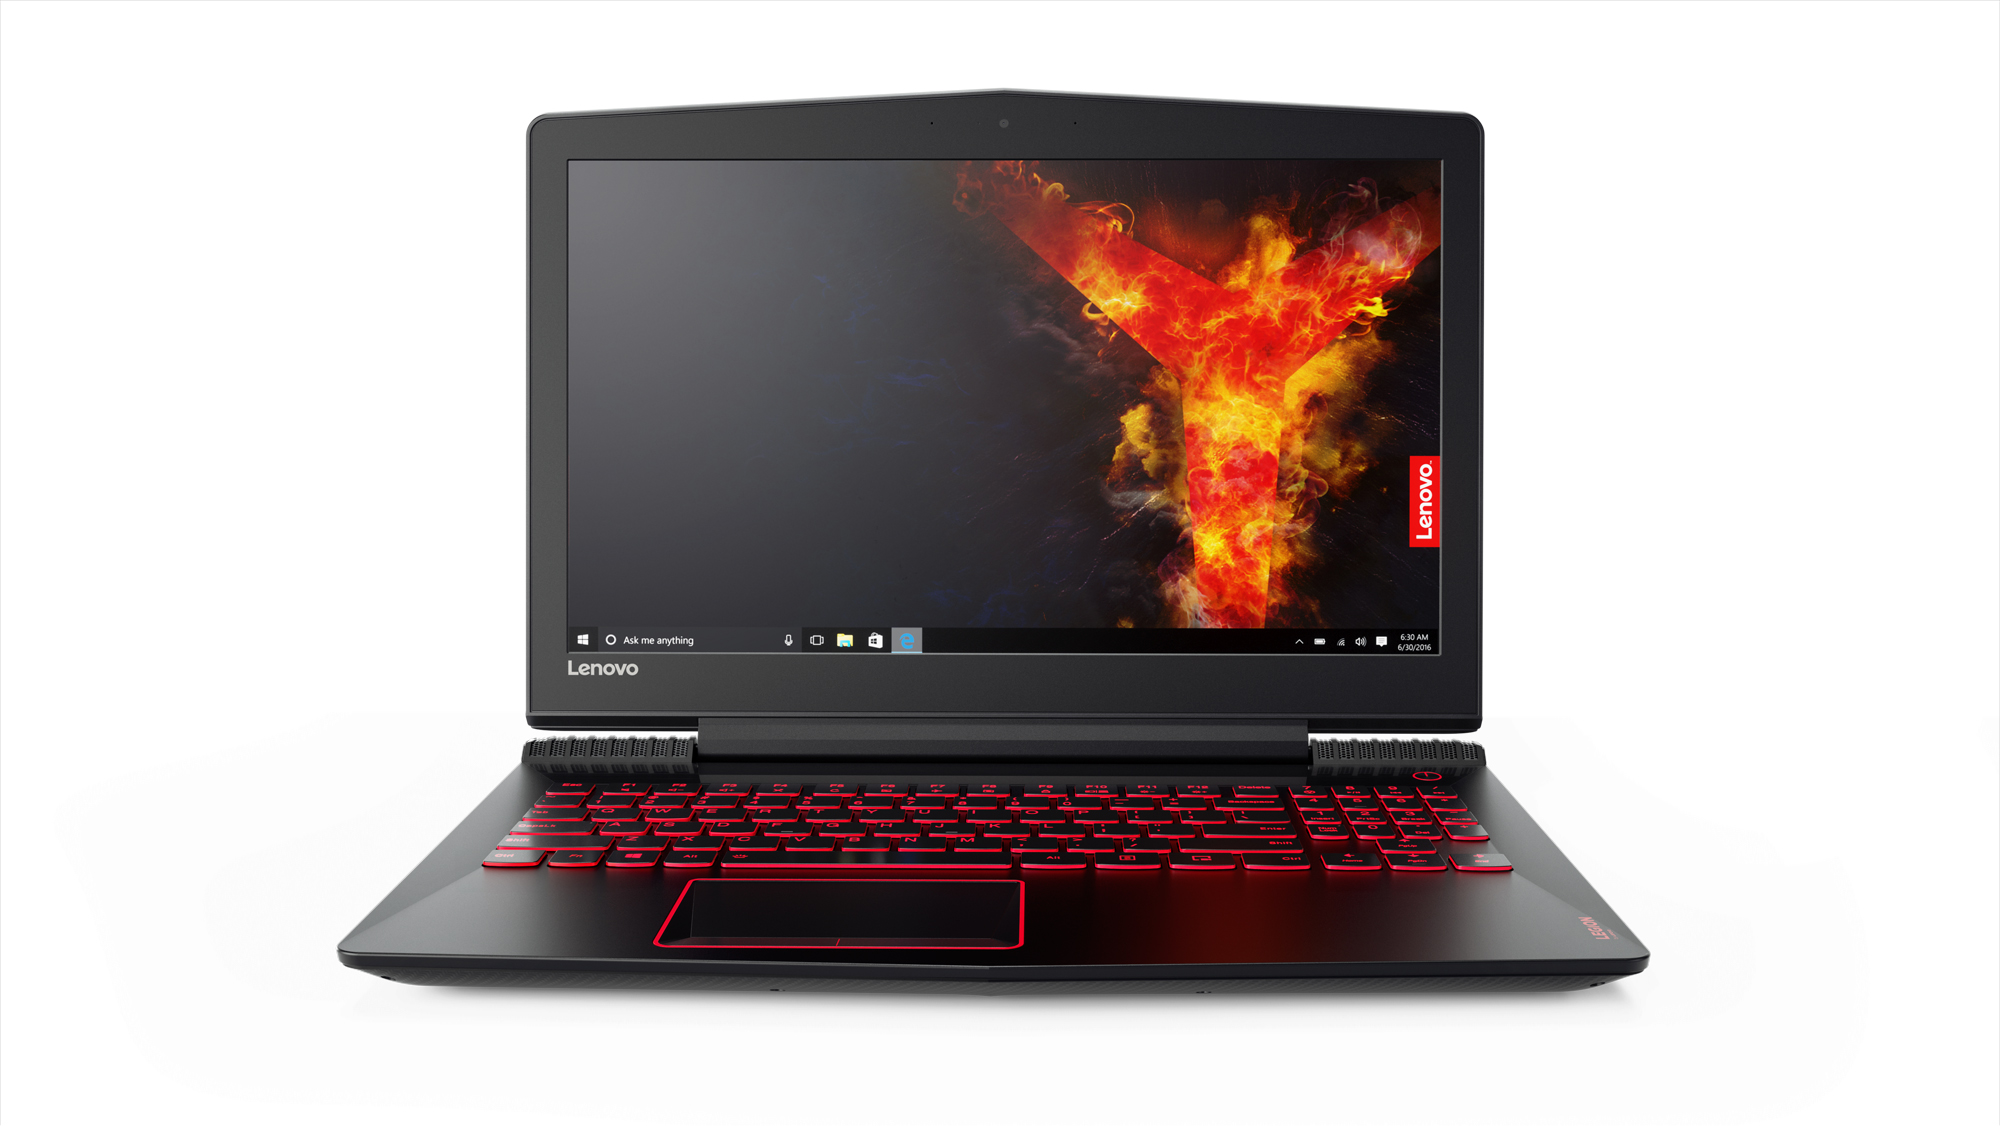 Lenovo Gaming Laptop 15.6", FHD Screen, Intel core i7-7700hq, 2.8-3.8 GHZ, Nvidia GeForce GTX 1050 Ti Graphic Card, 8GB DDR4 Memory, 1TB HDD, 80WK00T2US - image 2 of 17